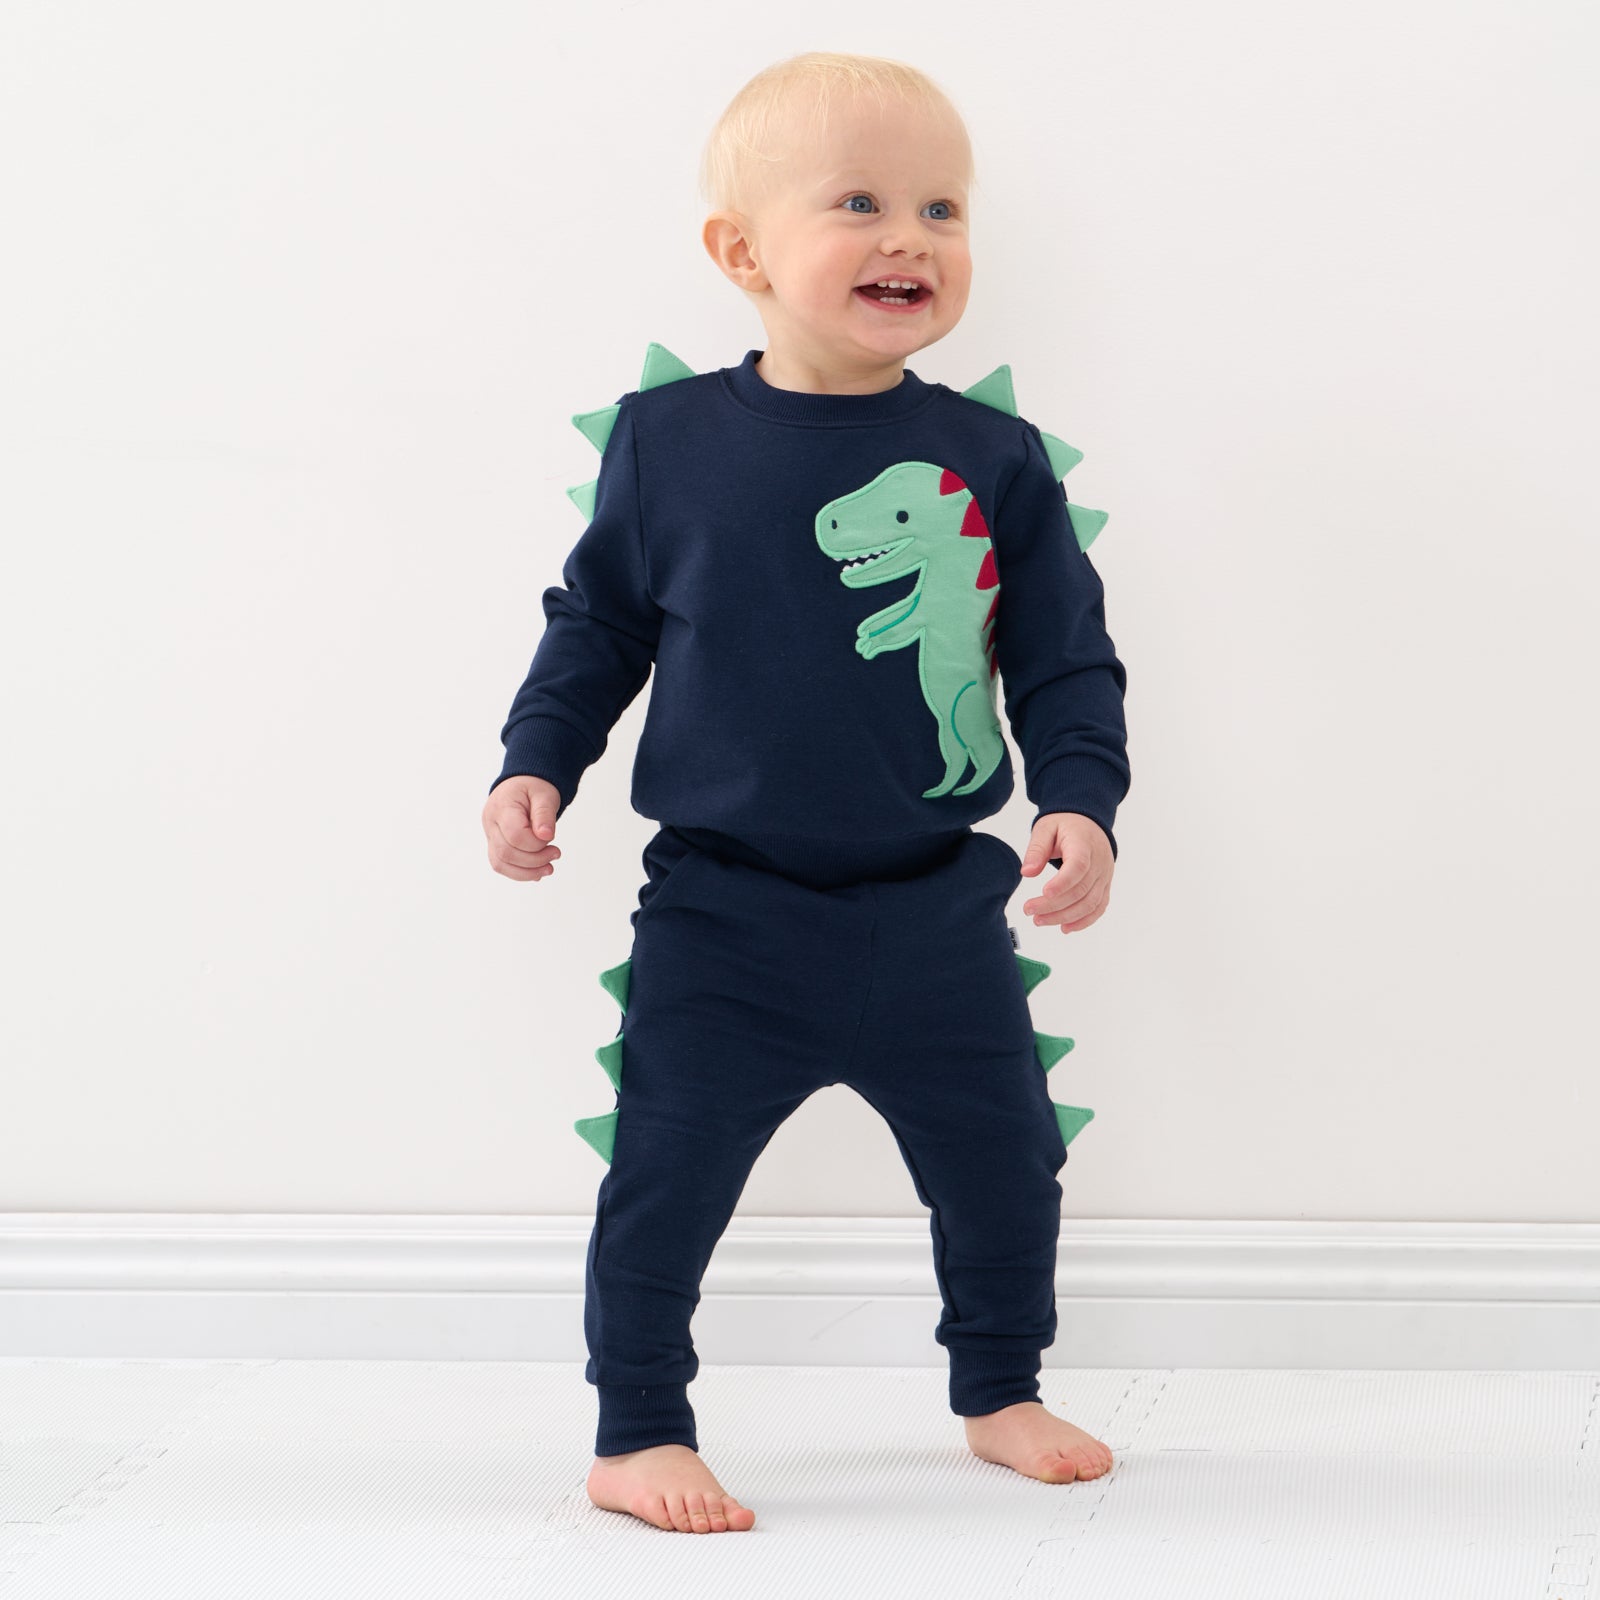 Boy in matching dinosaur outfit